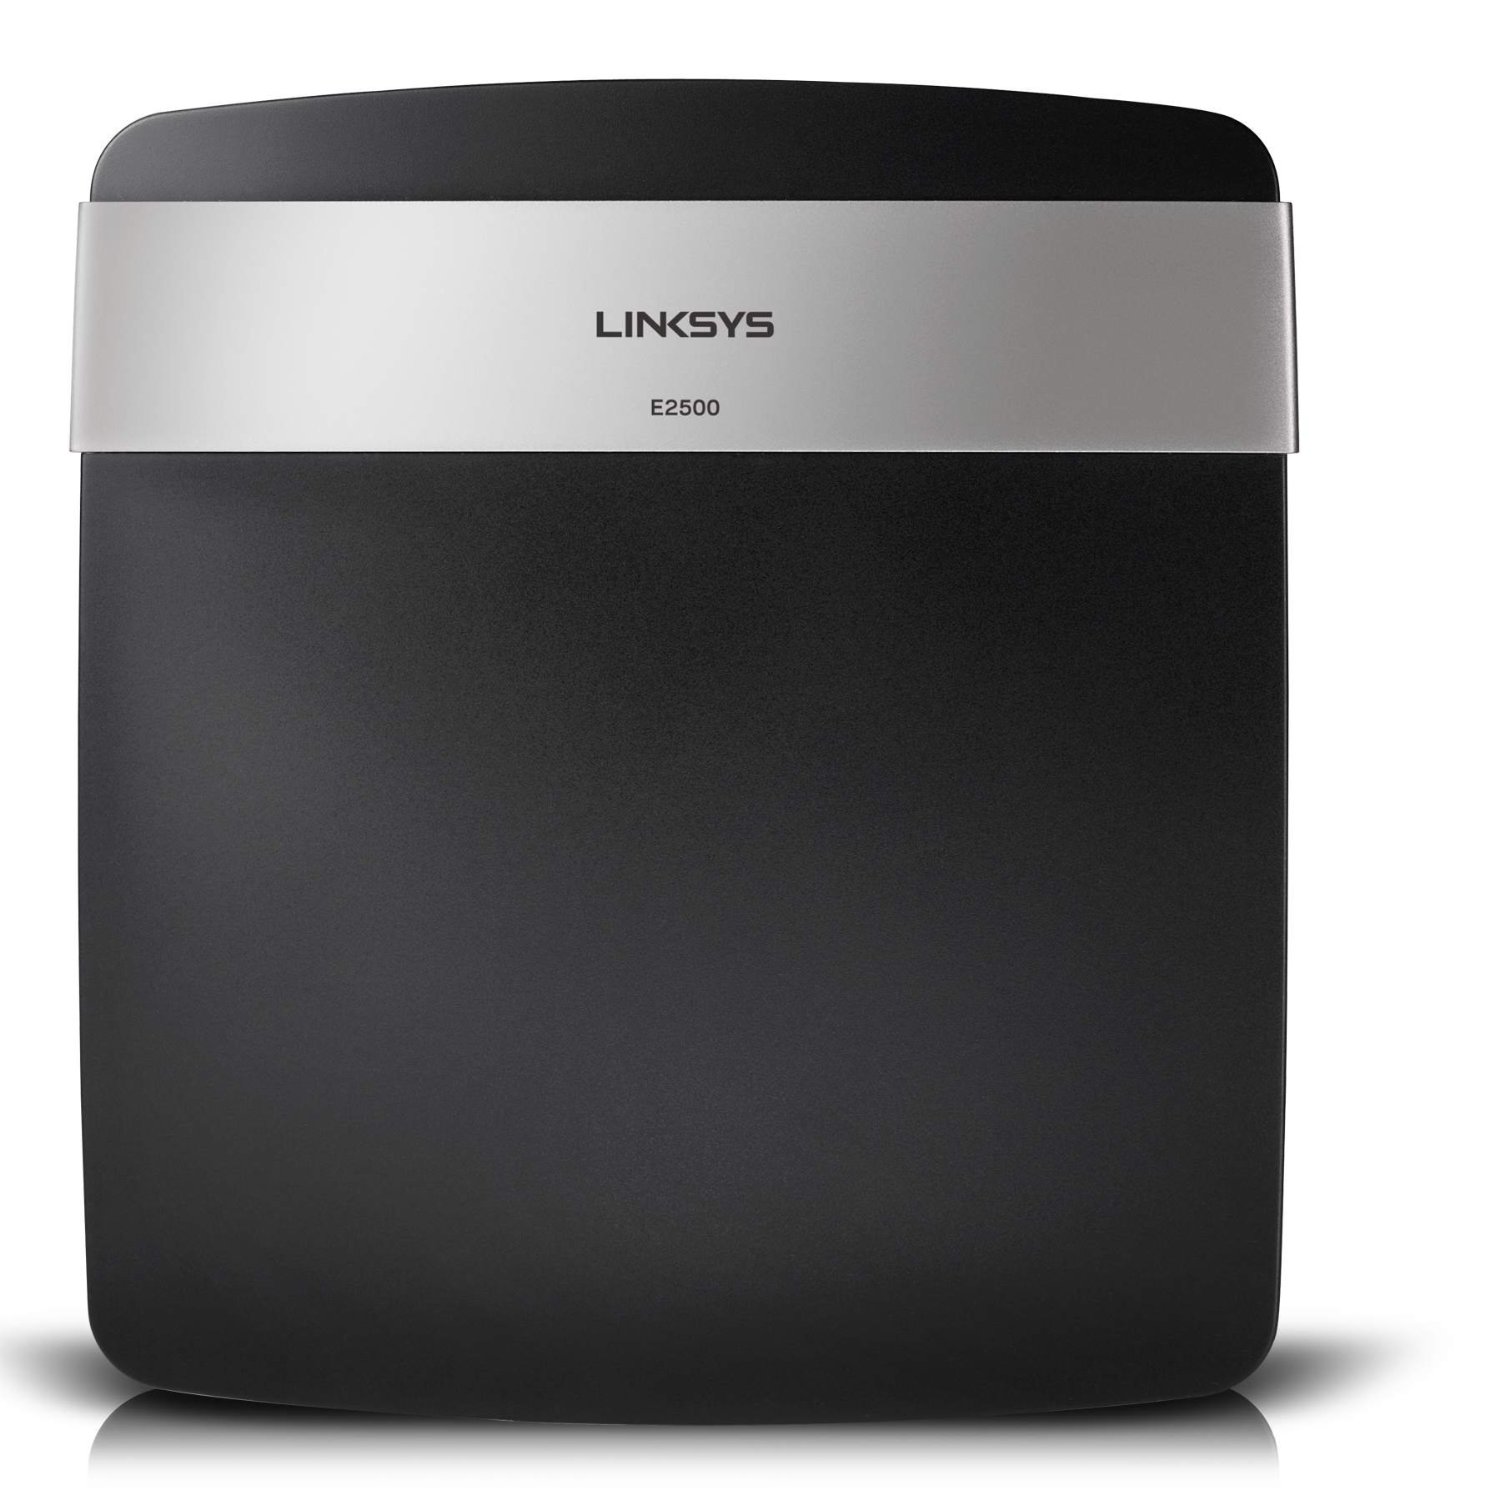 Wireless Router Linksys E2500